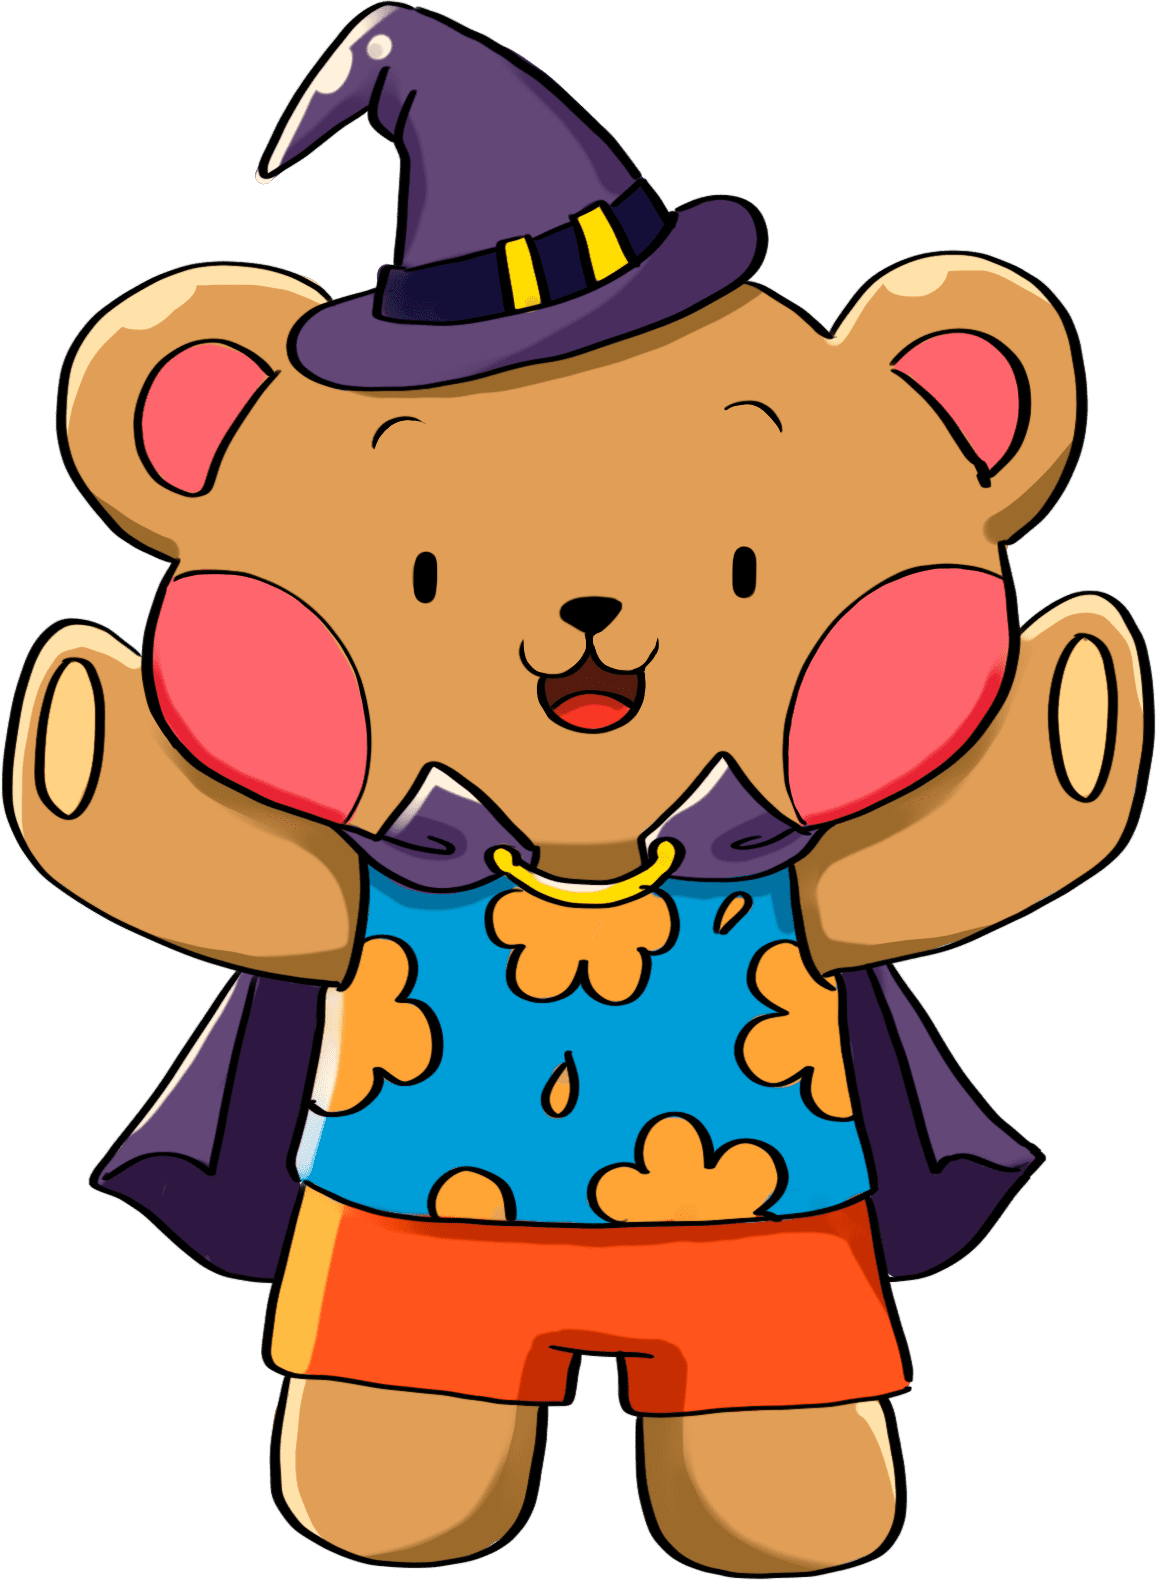 Sammy the Surfing bear dressed as a witch for Halloween